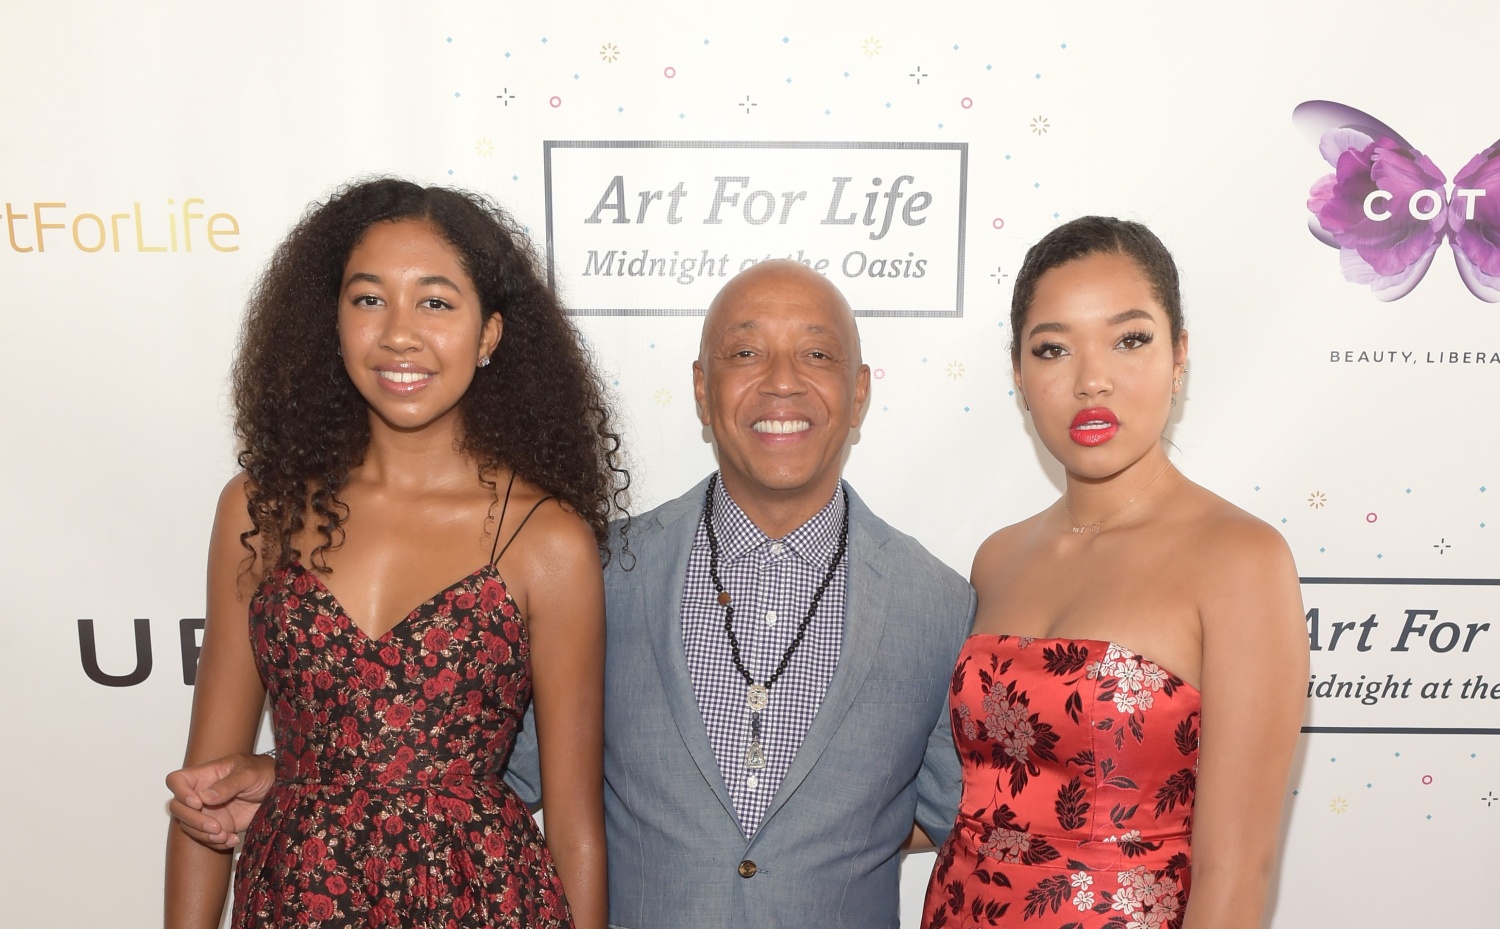 Russell Simmons and daughters Ming Lee Simmons and Aoki Lee Simmons